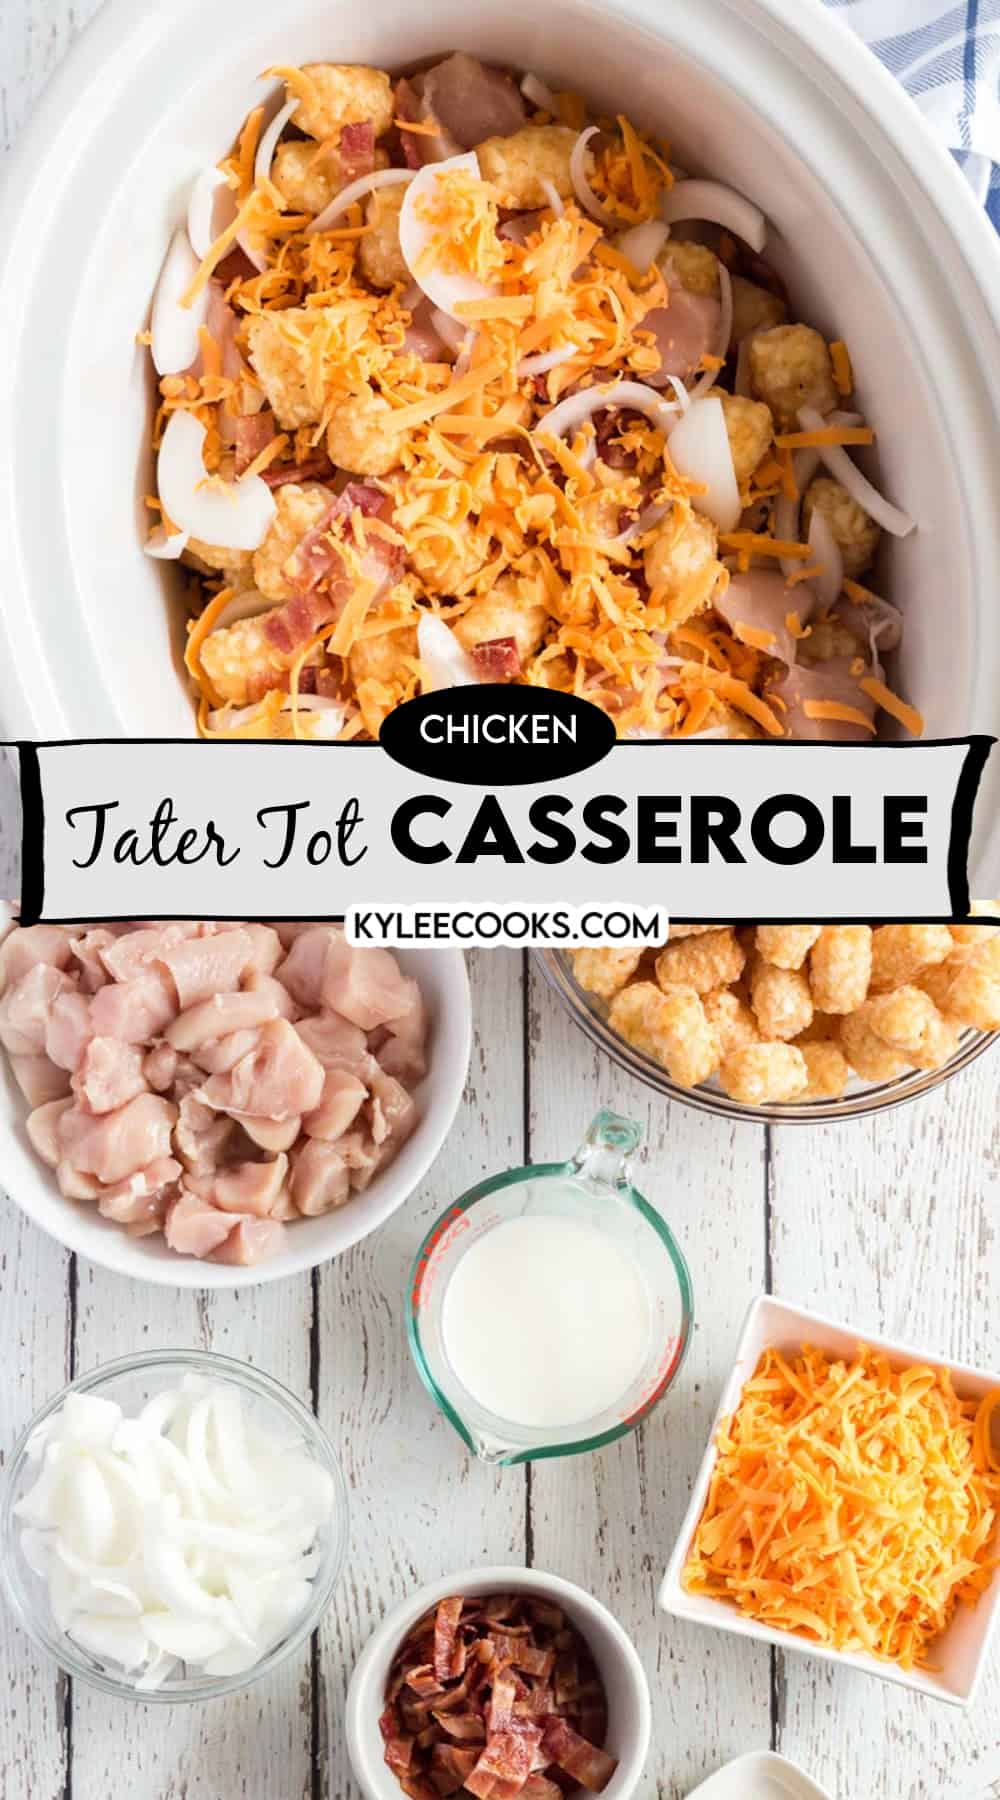 chicken tater tot casserole with ingredient images overlaid and ingredients listed in text.